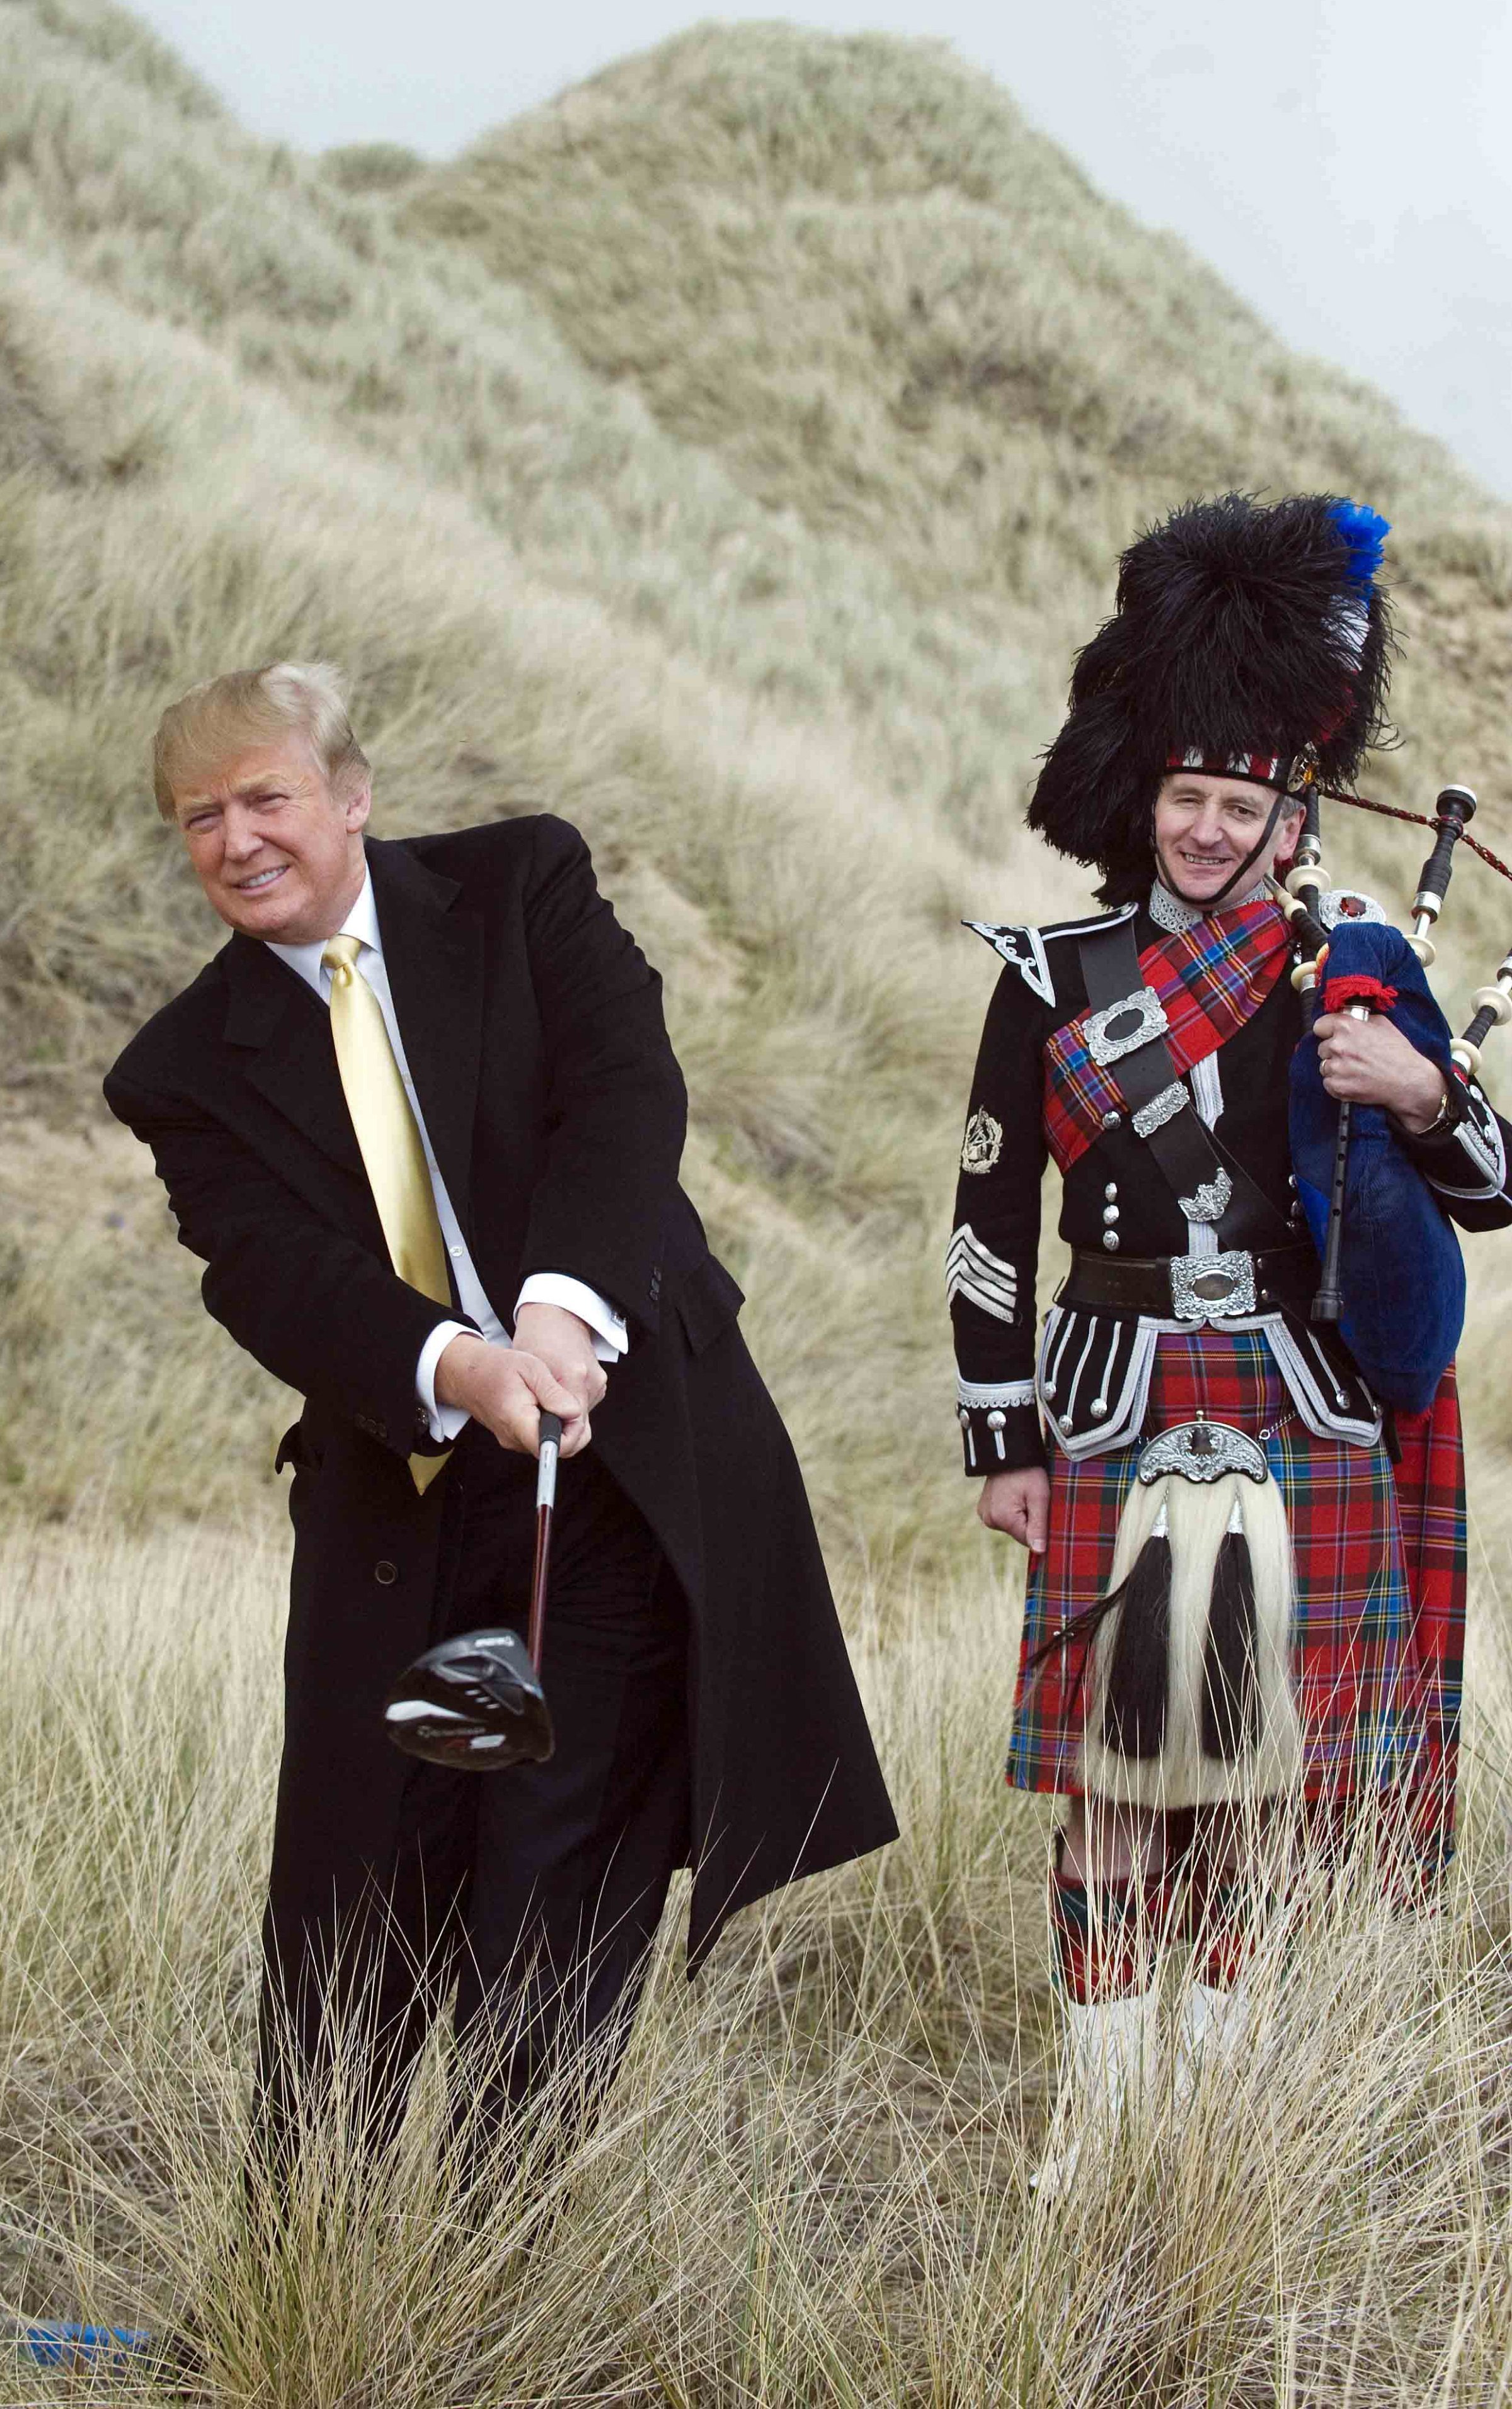 Donald Trump (L) poses for photographers during a visit to the construction site of his golf course on the Menie Estate near Aberdeen, Scotland on May 27, 2010.